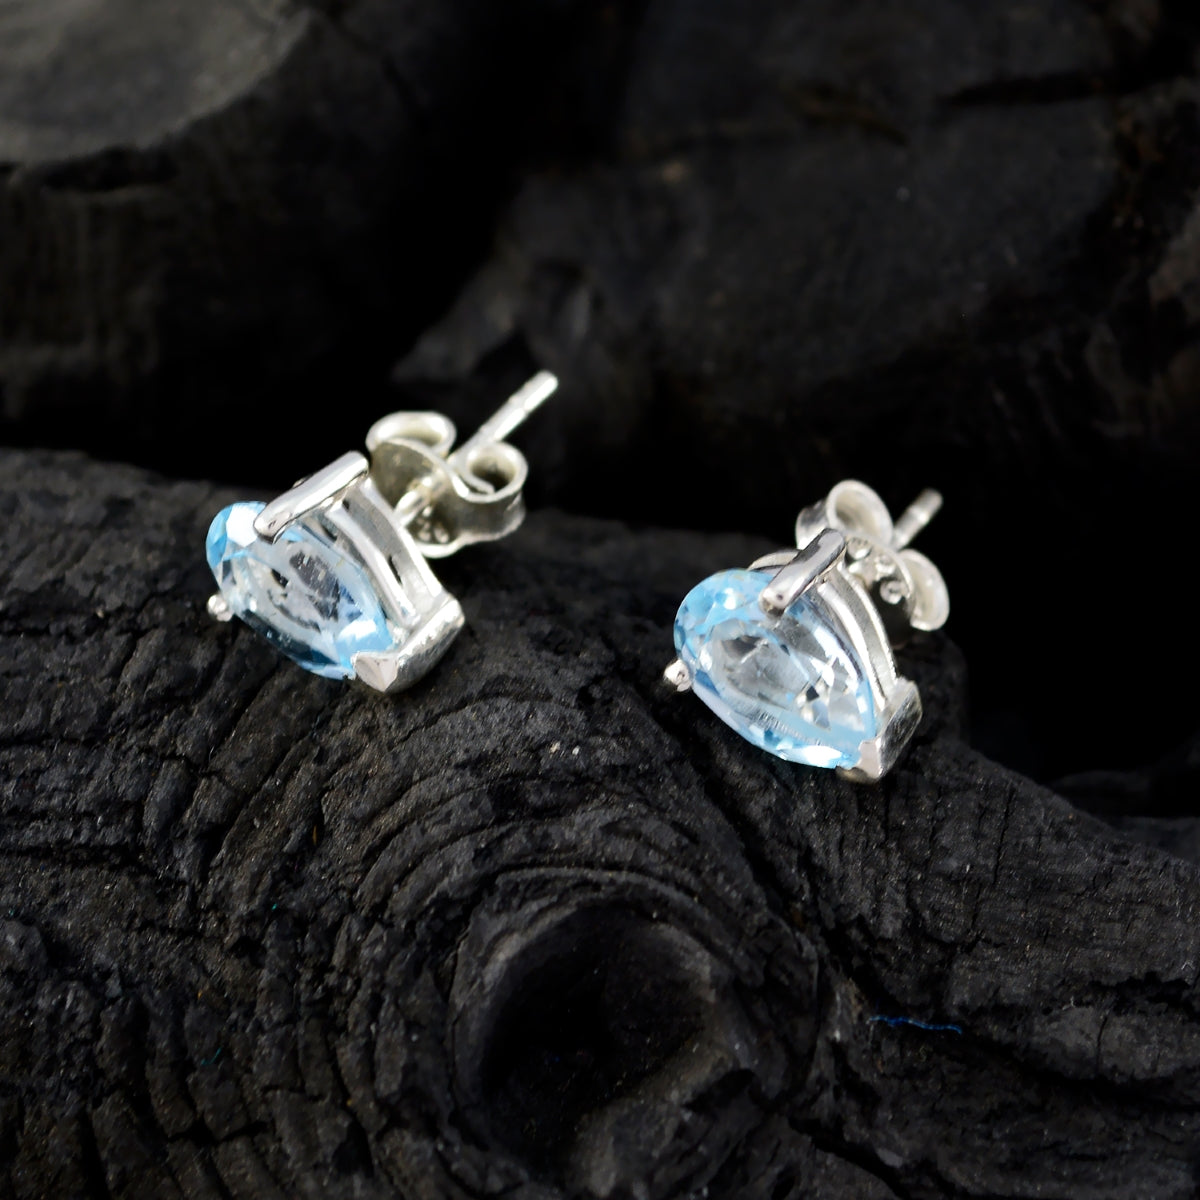 Riyo Good Gemstones Pear Faceted Blue Topaz Silver Earring gift for valentine's day